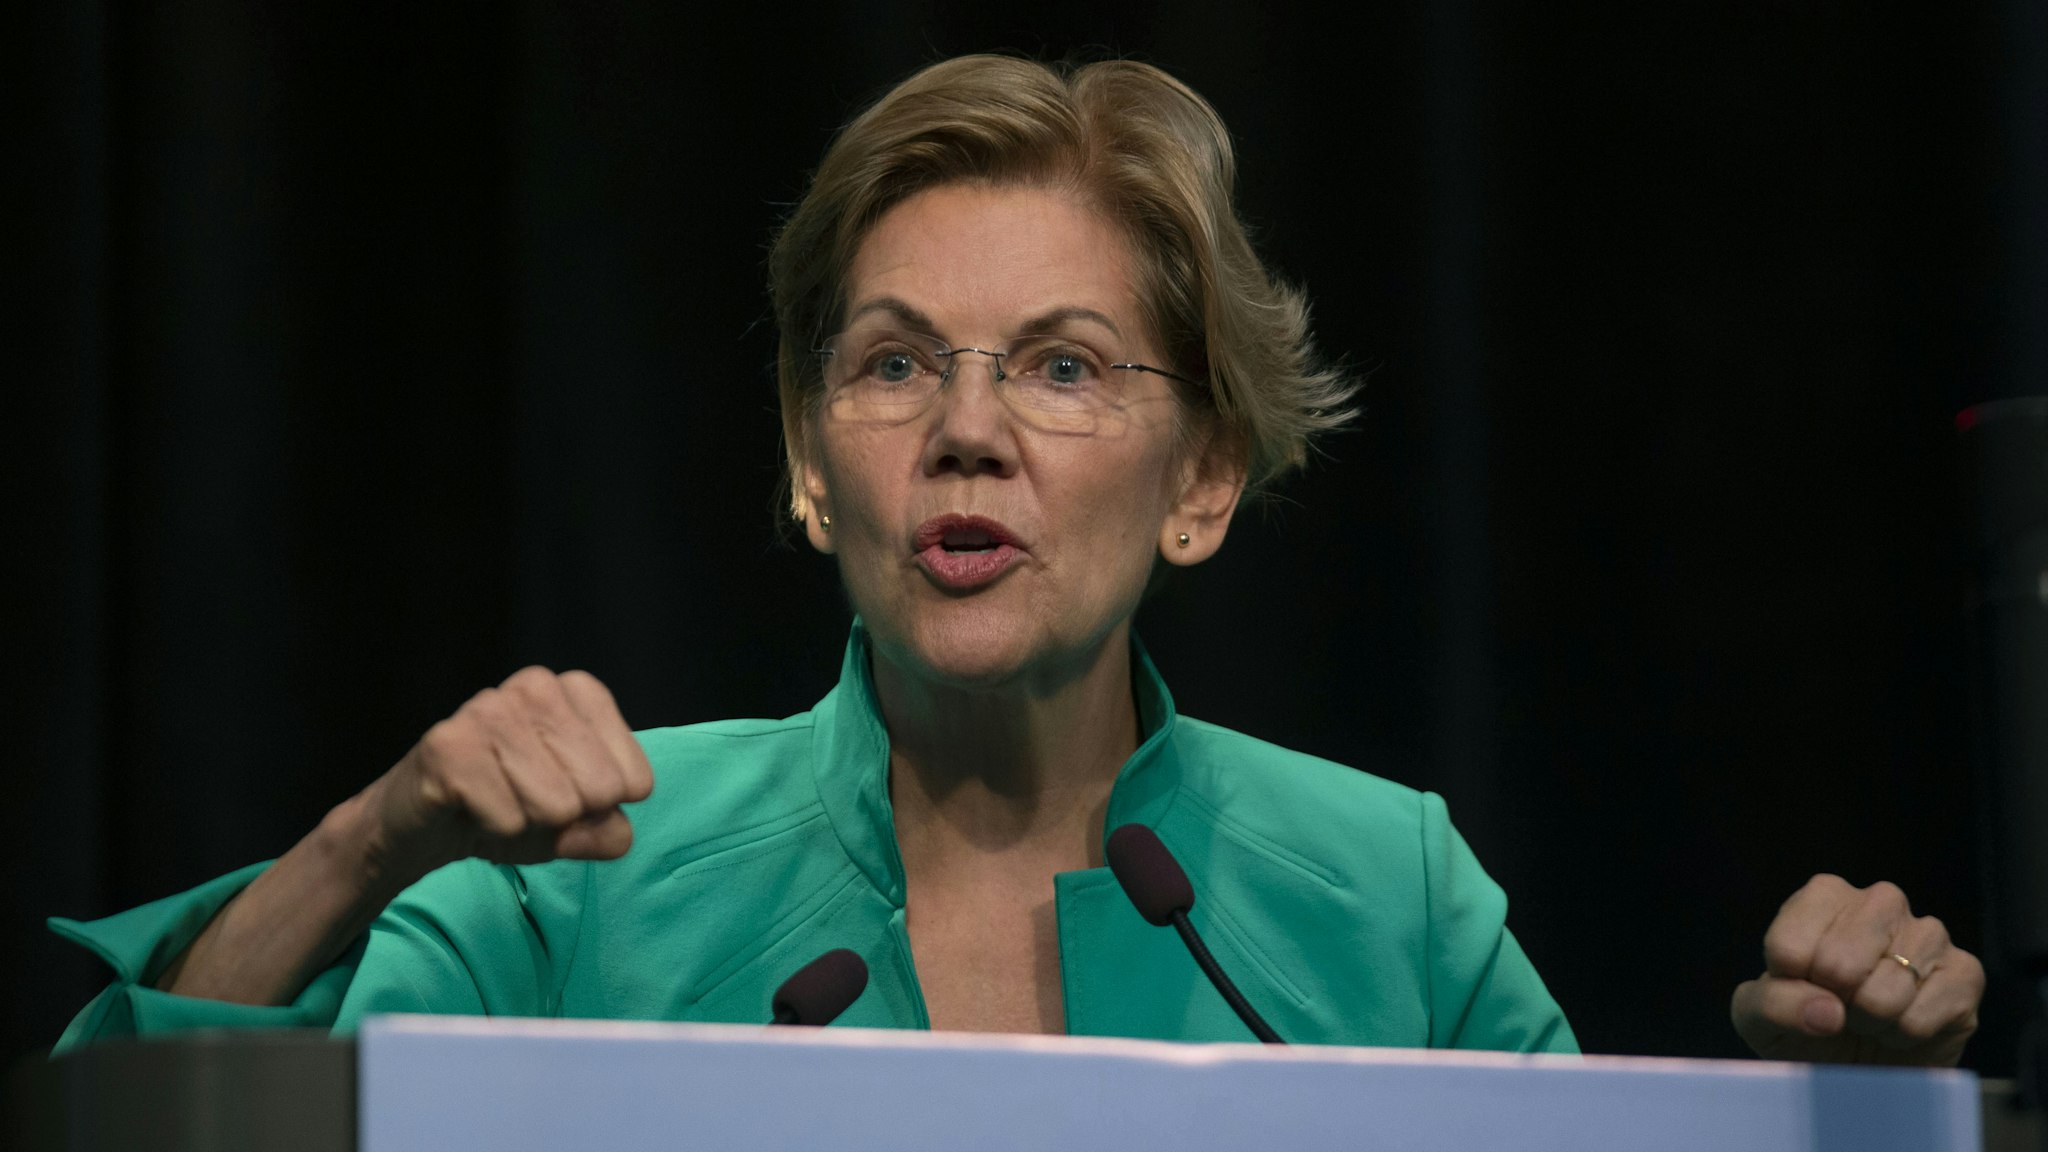 enator Elizabeth Warren, a Democrat from Massachusetts and 2020 presidential candidate, speaks during the Iowa Federation of Labor AFL-CIO annual convention in Altoona, Iowa, U.S., on Wednesday, Aug. 21, 2019. A new CNN poll out on Tuesday shows Joe Biden with a commanding lead over the rest of the Democratic field. With 29% support, Biden is lapping his nearest rivals, Bernie Sanders (15%) and Elizabeth Warren (14%). Kamala Harris, whose attack on Biden's busing record vaulted her into the top tier after the Miami debate, has plunged to 5%. Photographer: Daniel Acker/Bloomberg via Getty Images